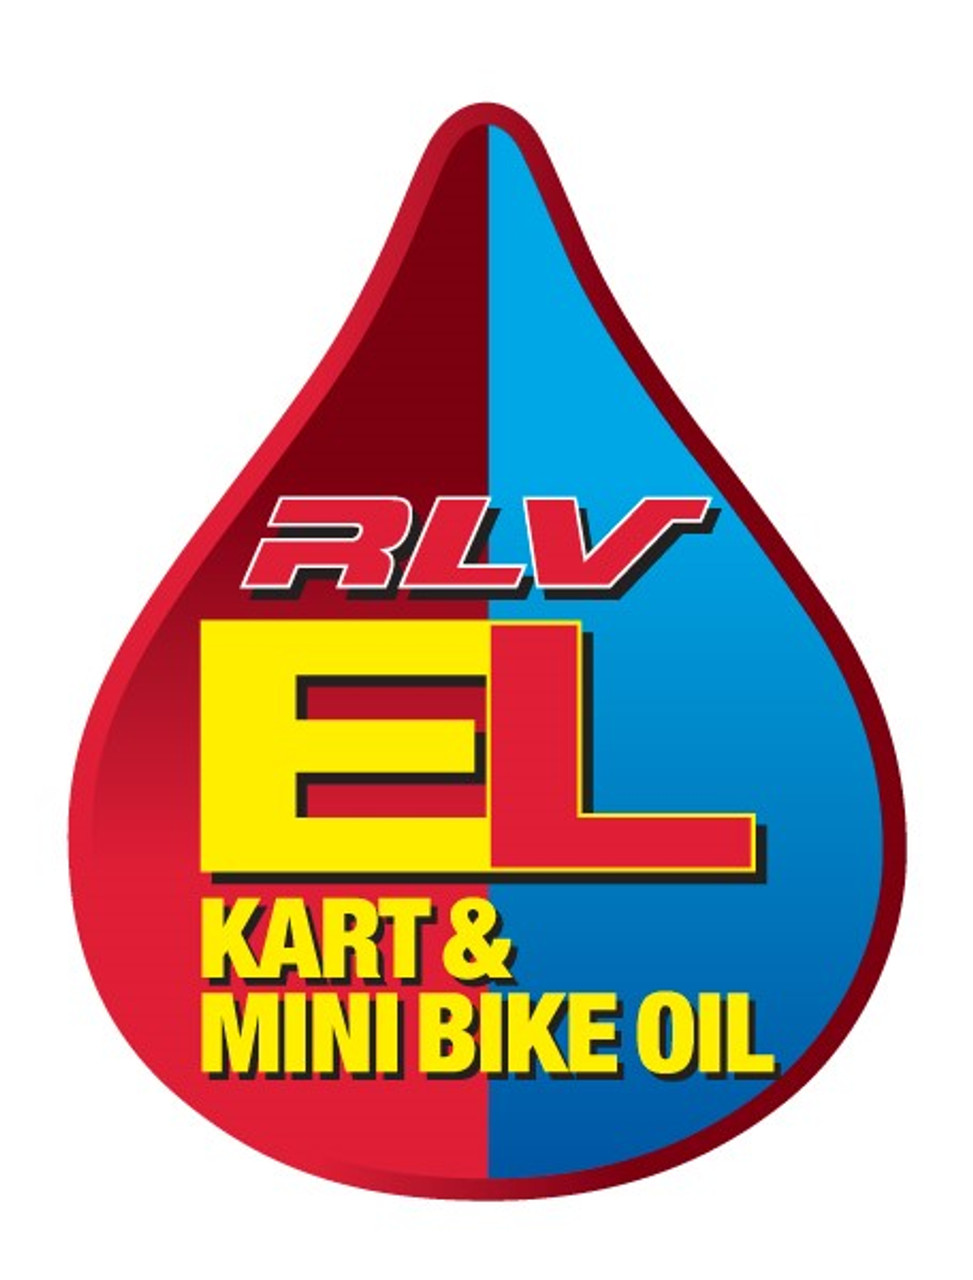 RLV EL Kart & Minibike Oil, Extended Life 4-T Synthetic Formulation